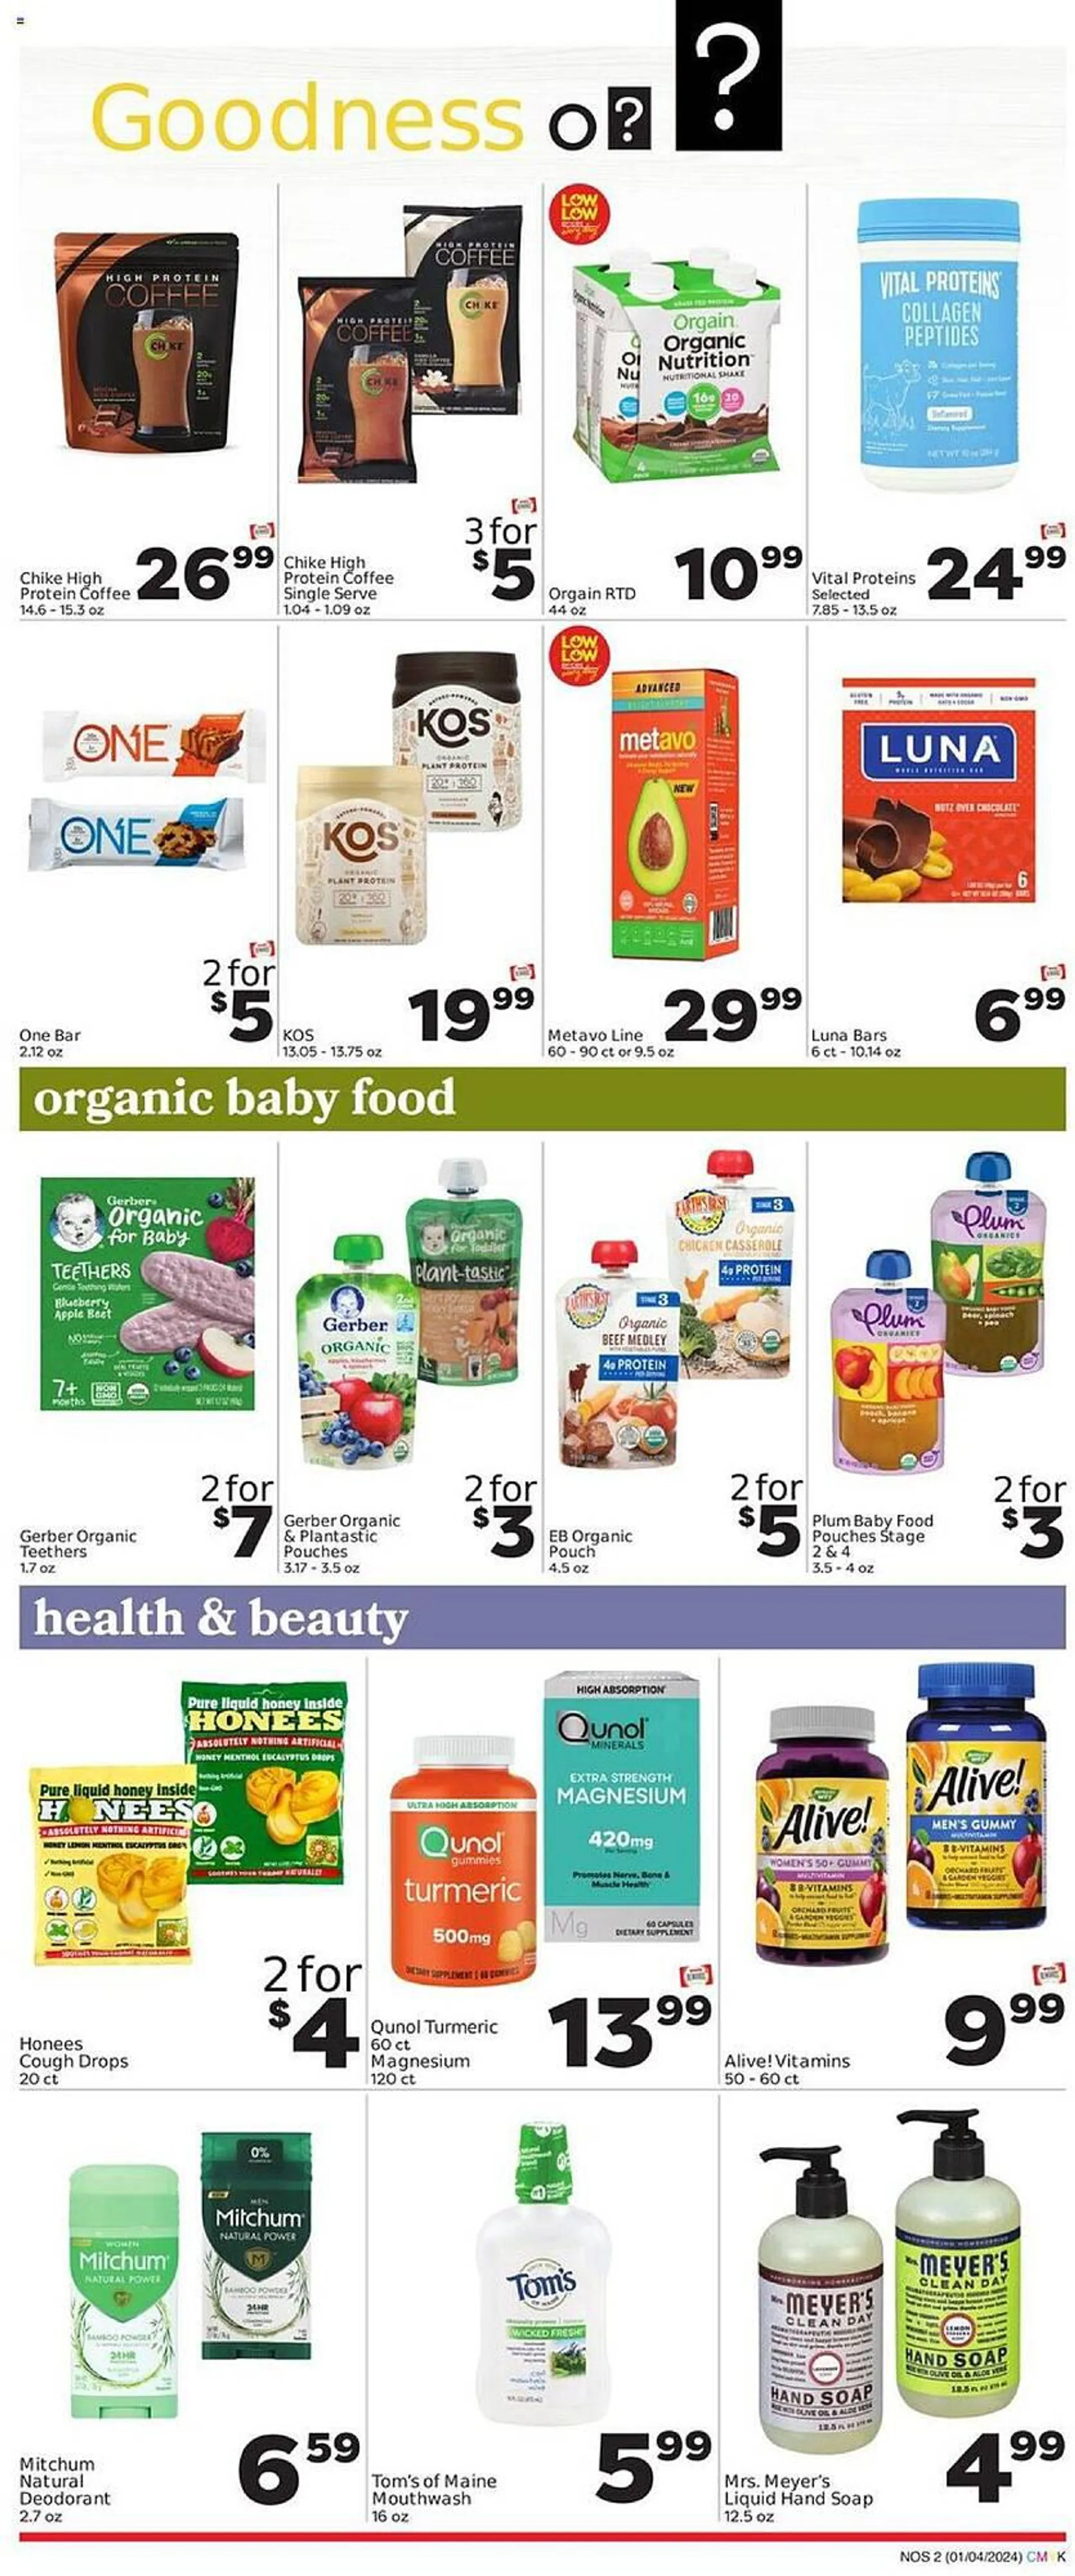 Weekly ad Weis Markets Weekly Ad from January 4 to January 31 2024 - Page 